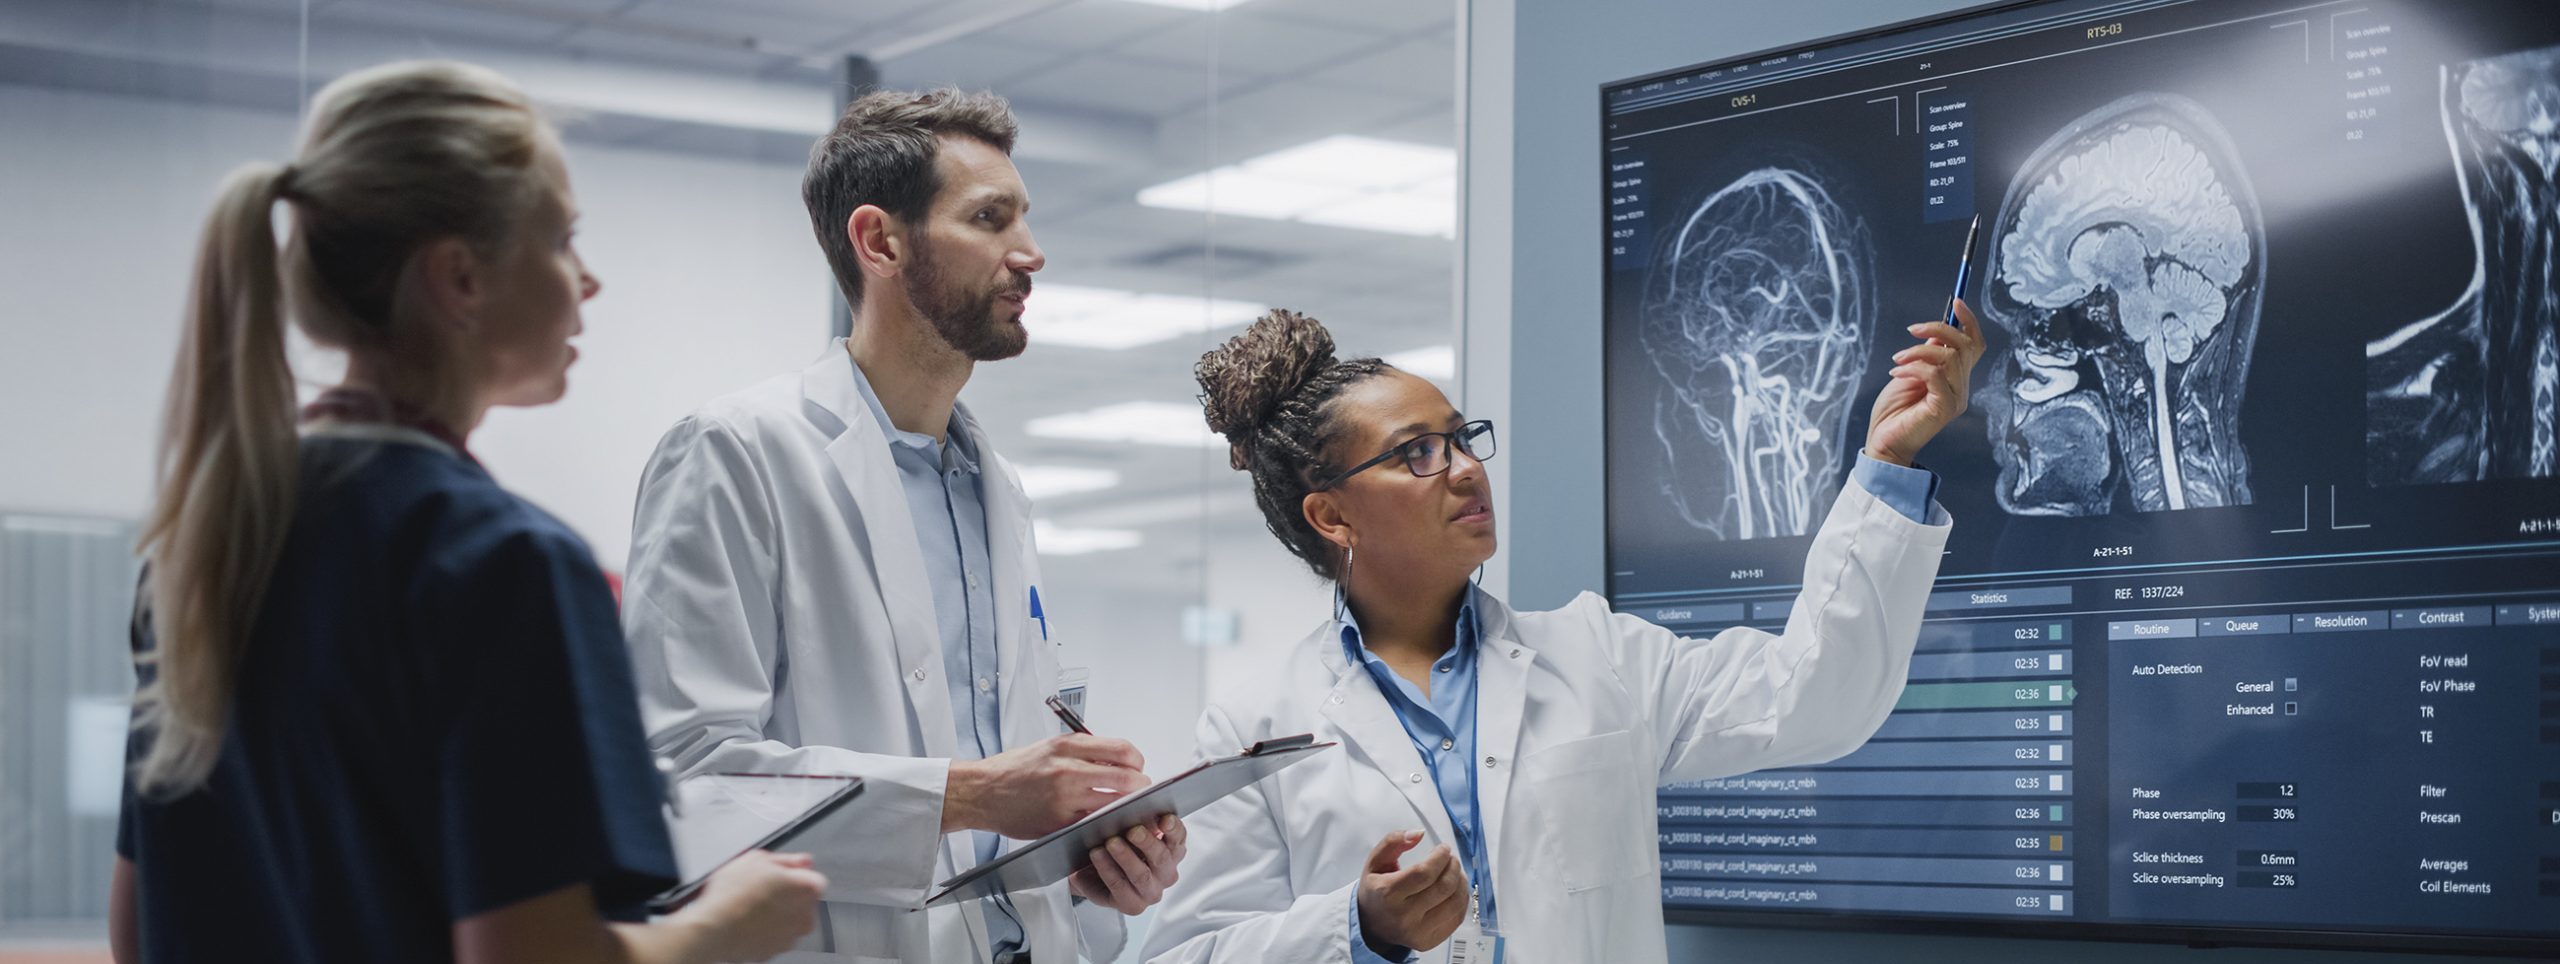 NAVIGATING TOMORROW’S HEALTHCARE WITH MULTIMODAL AND NEUROMORPHIC AI